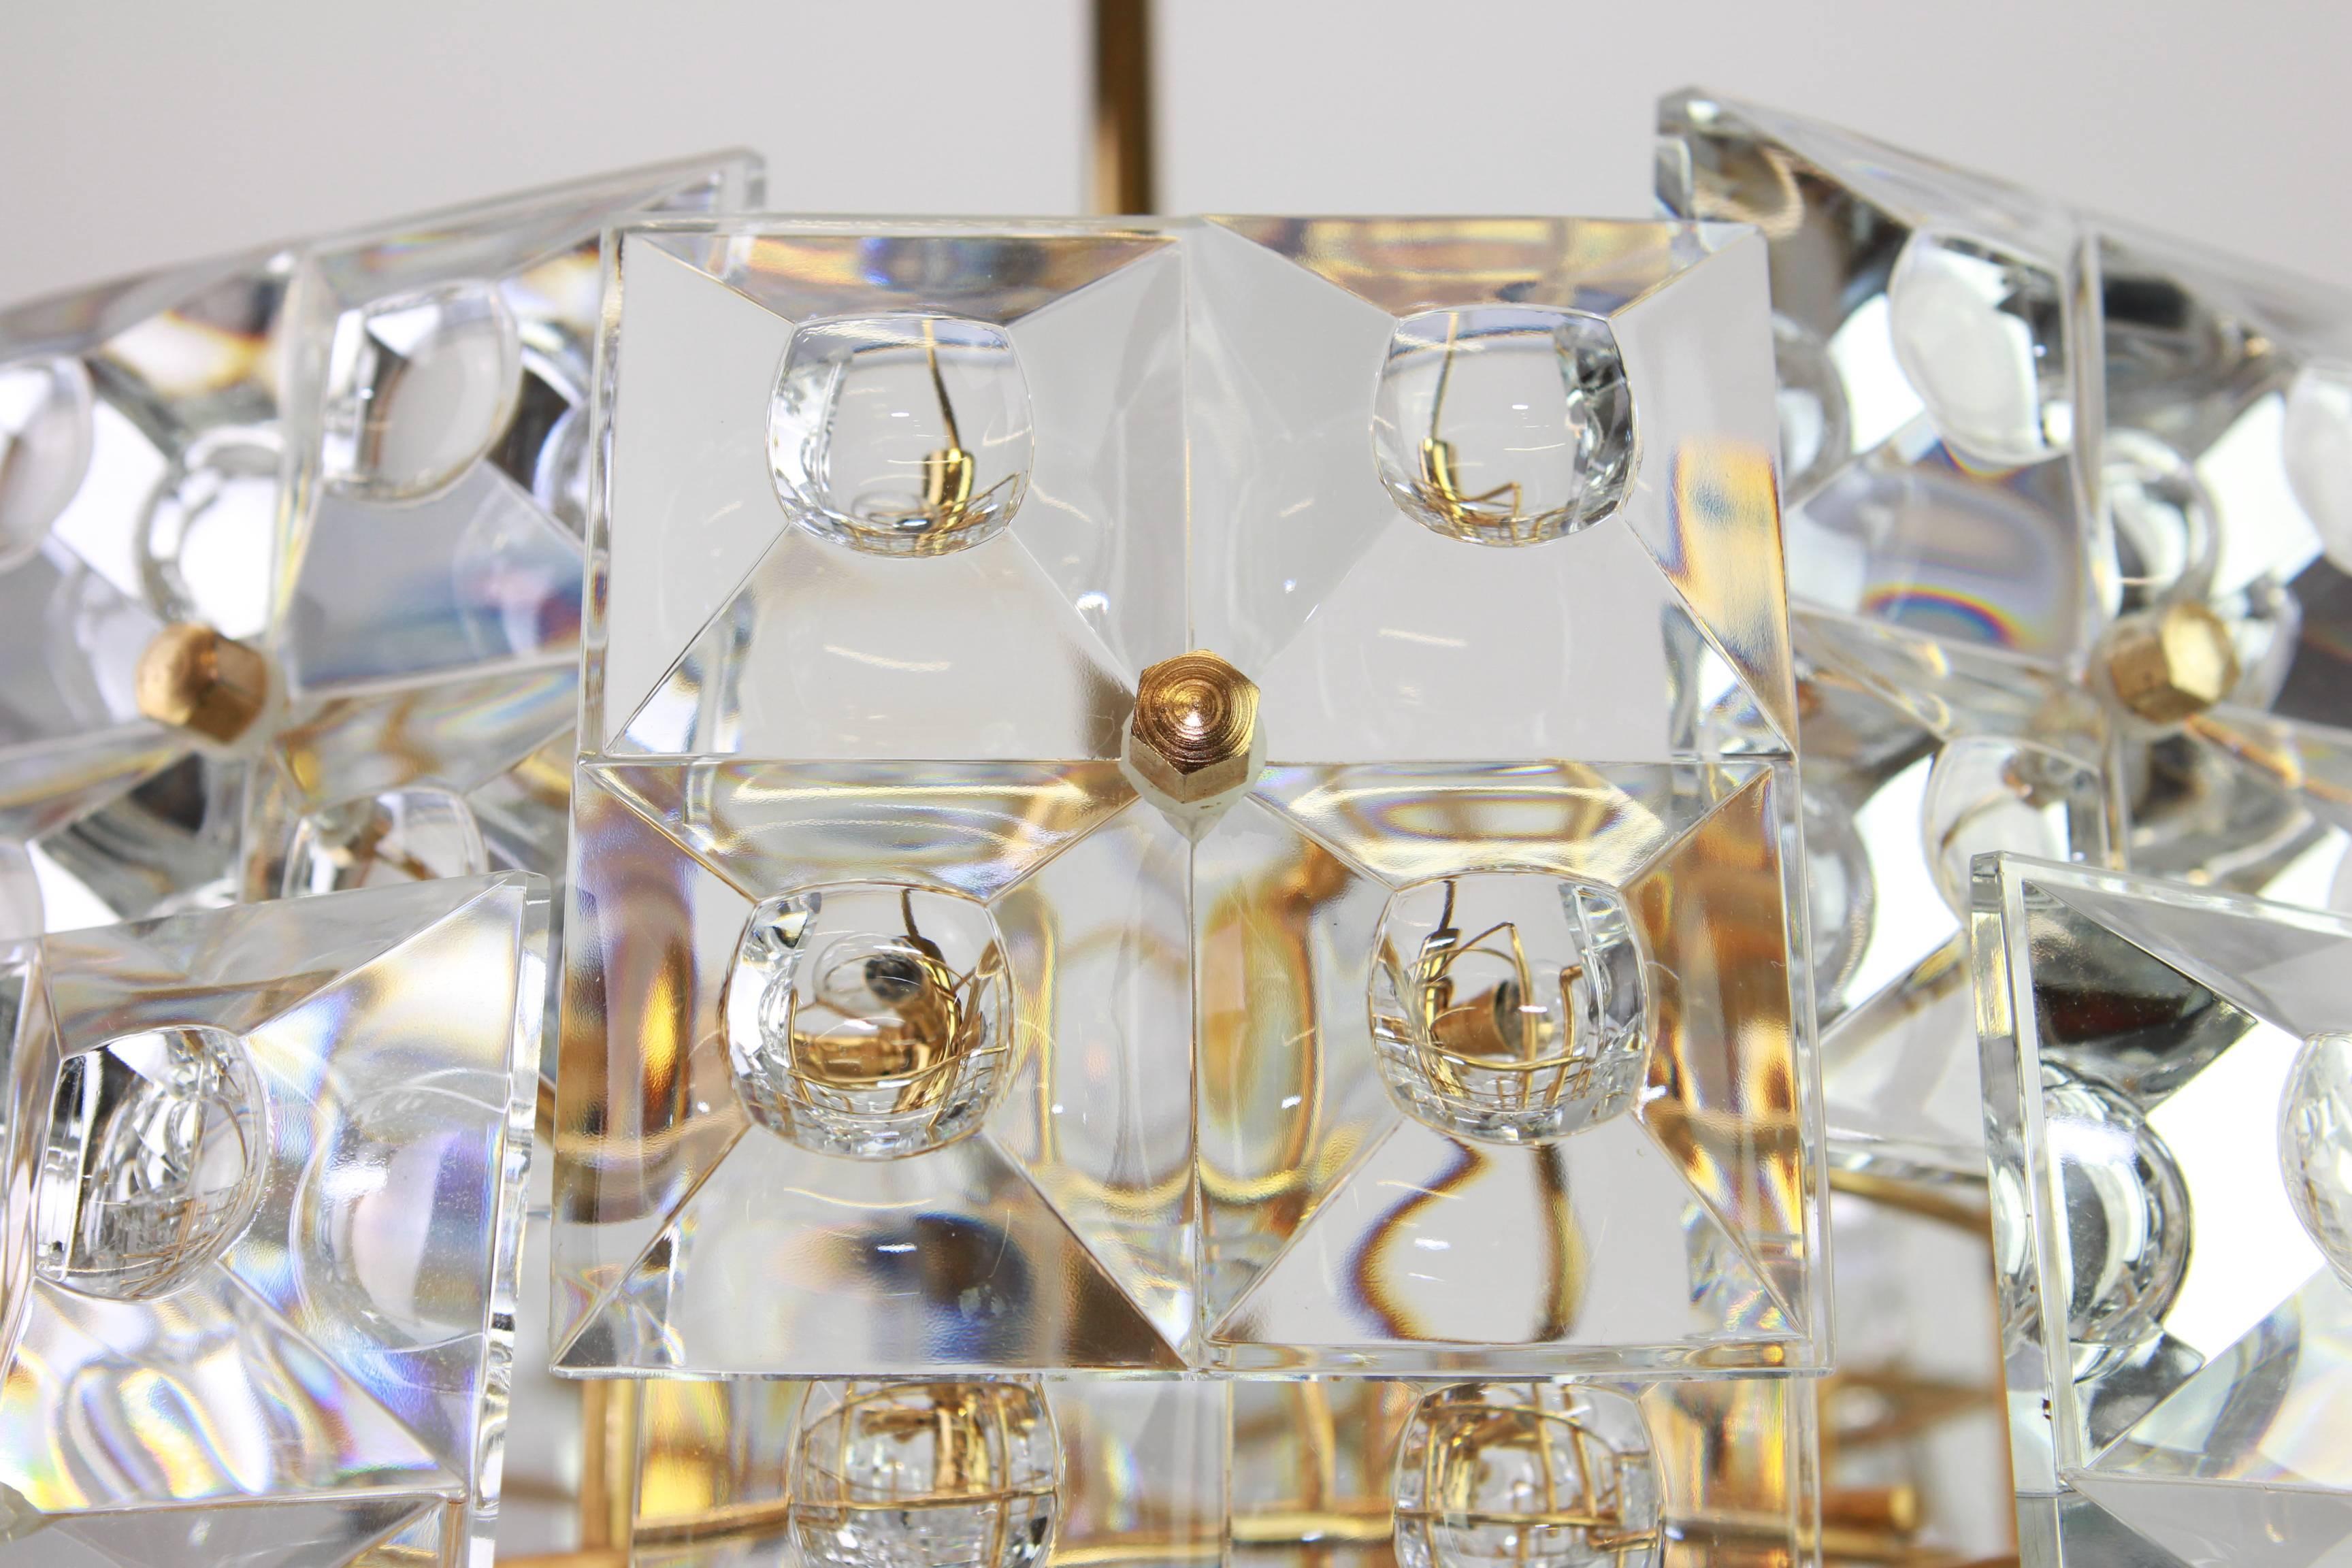 Late 20th Century Stunning Chandelier, Brass and Crystal Glass by Kinkeldey, Germany, 1970s For Sale